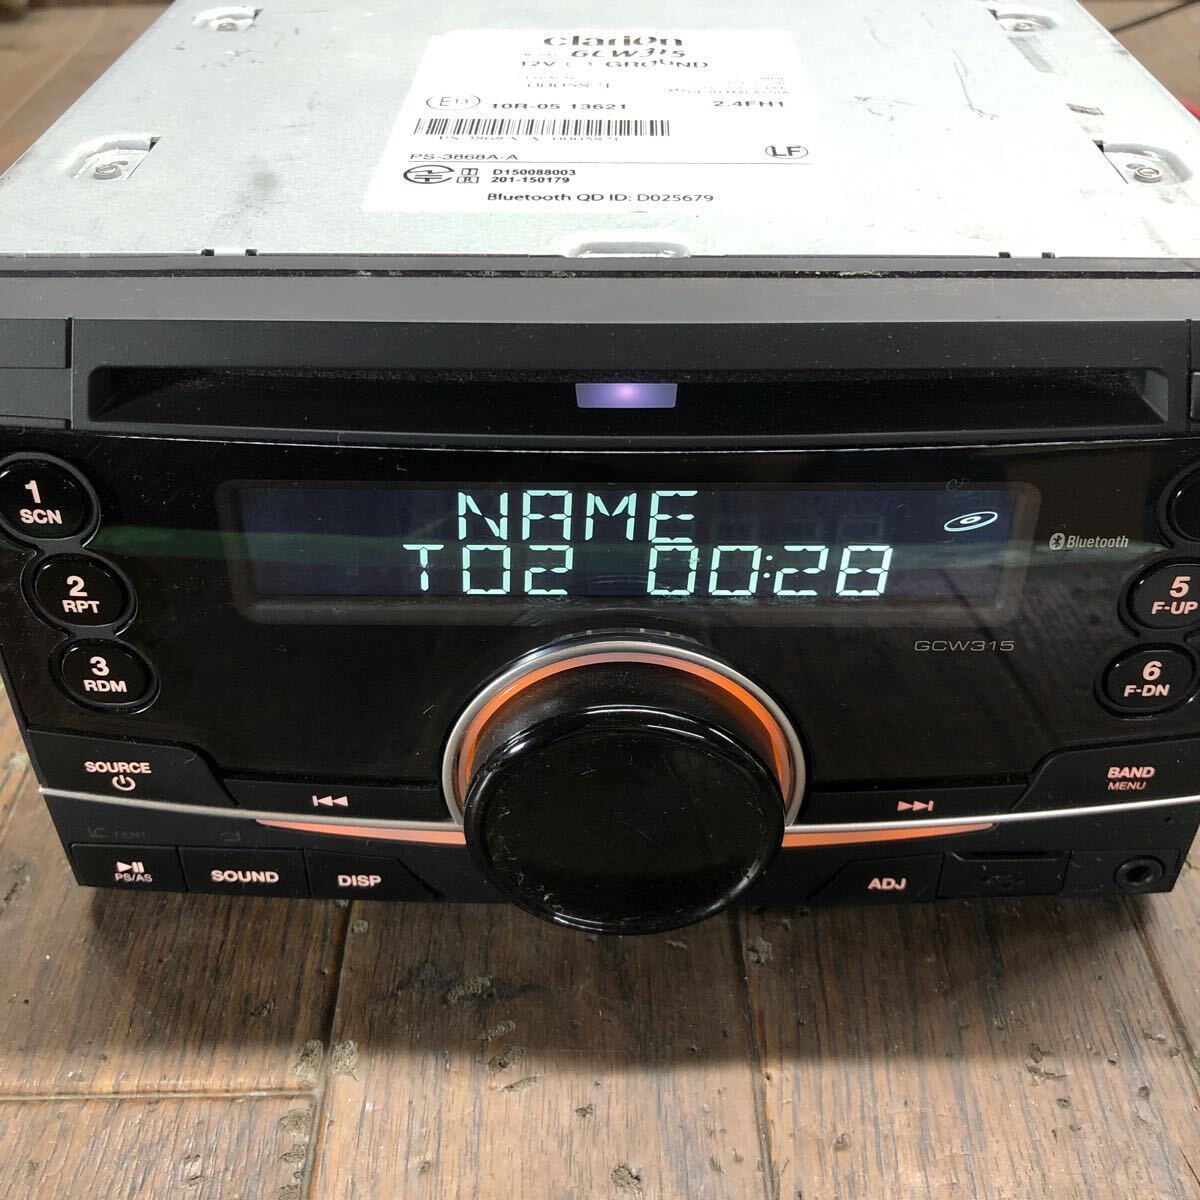 AV3-160 super-discount car stereo CD player clarion GCW315 0005871 CD Bluetooth USB AUX FM/AM body only simple operation verification ending used present condition goods 